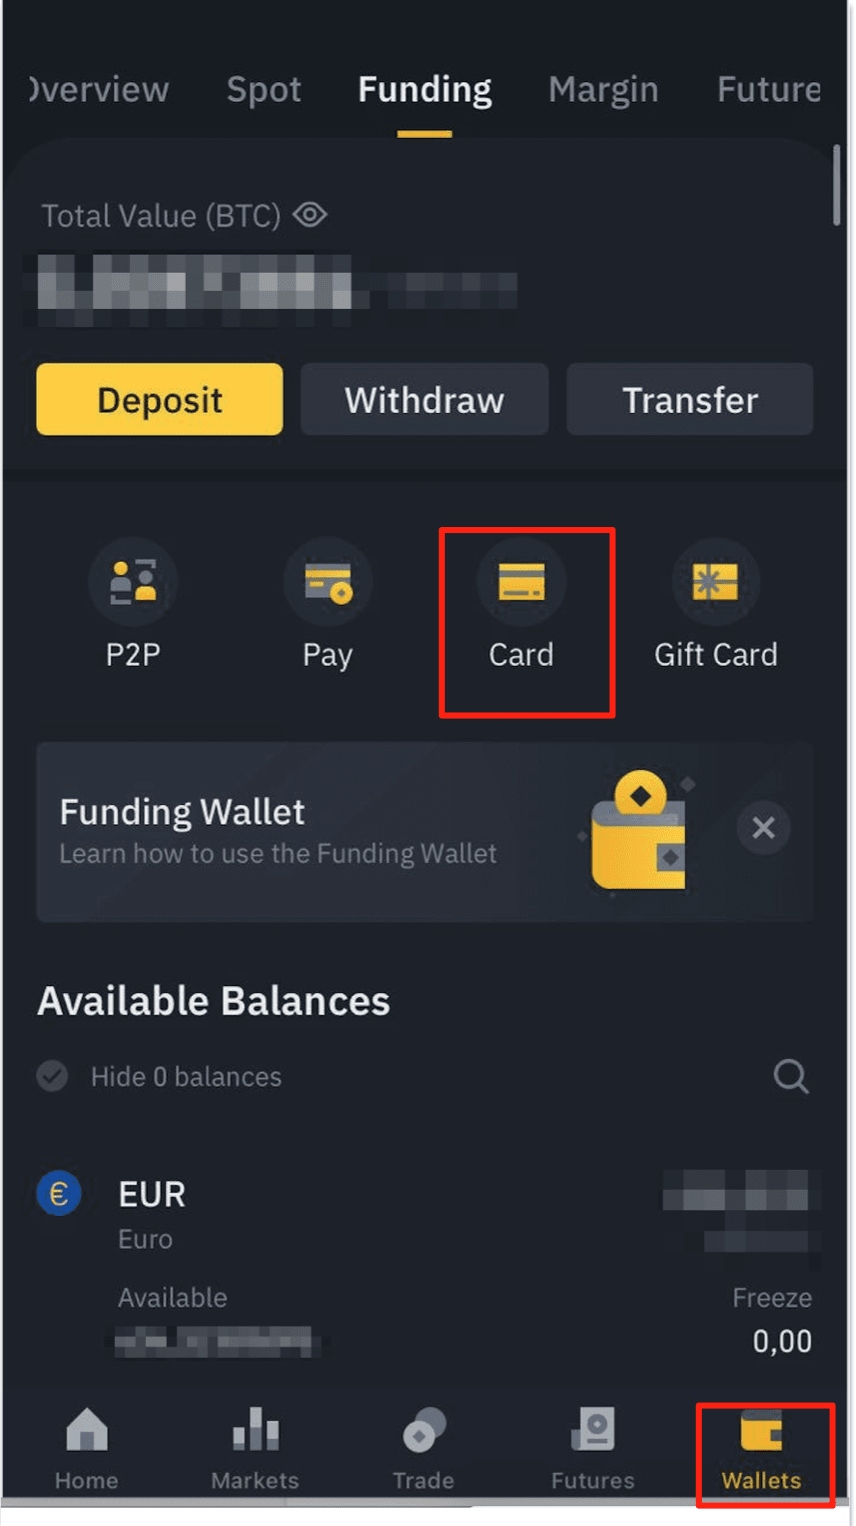 How to Buy Crypto with a Credit Card on Binance in 